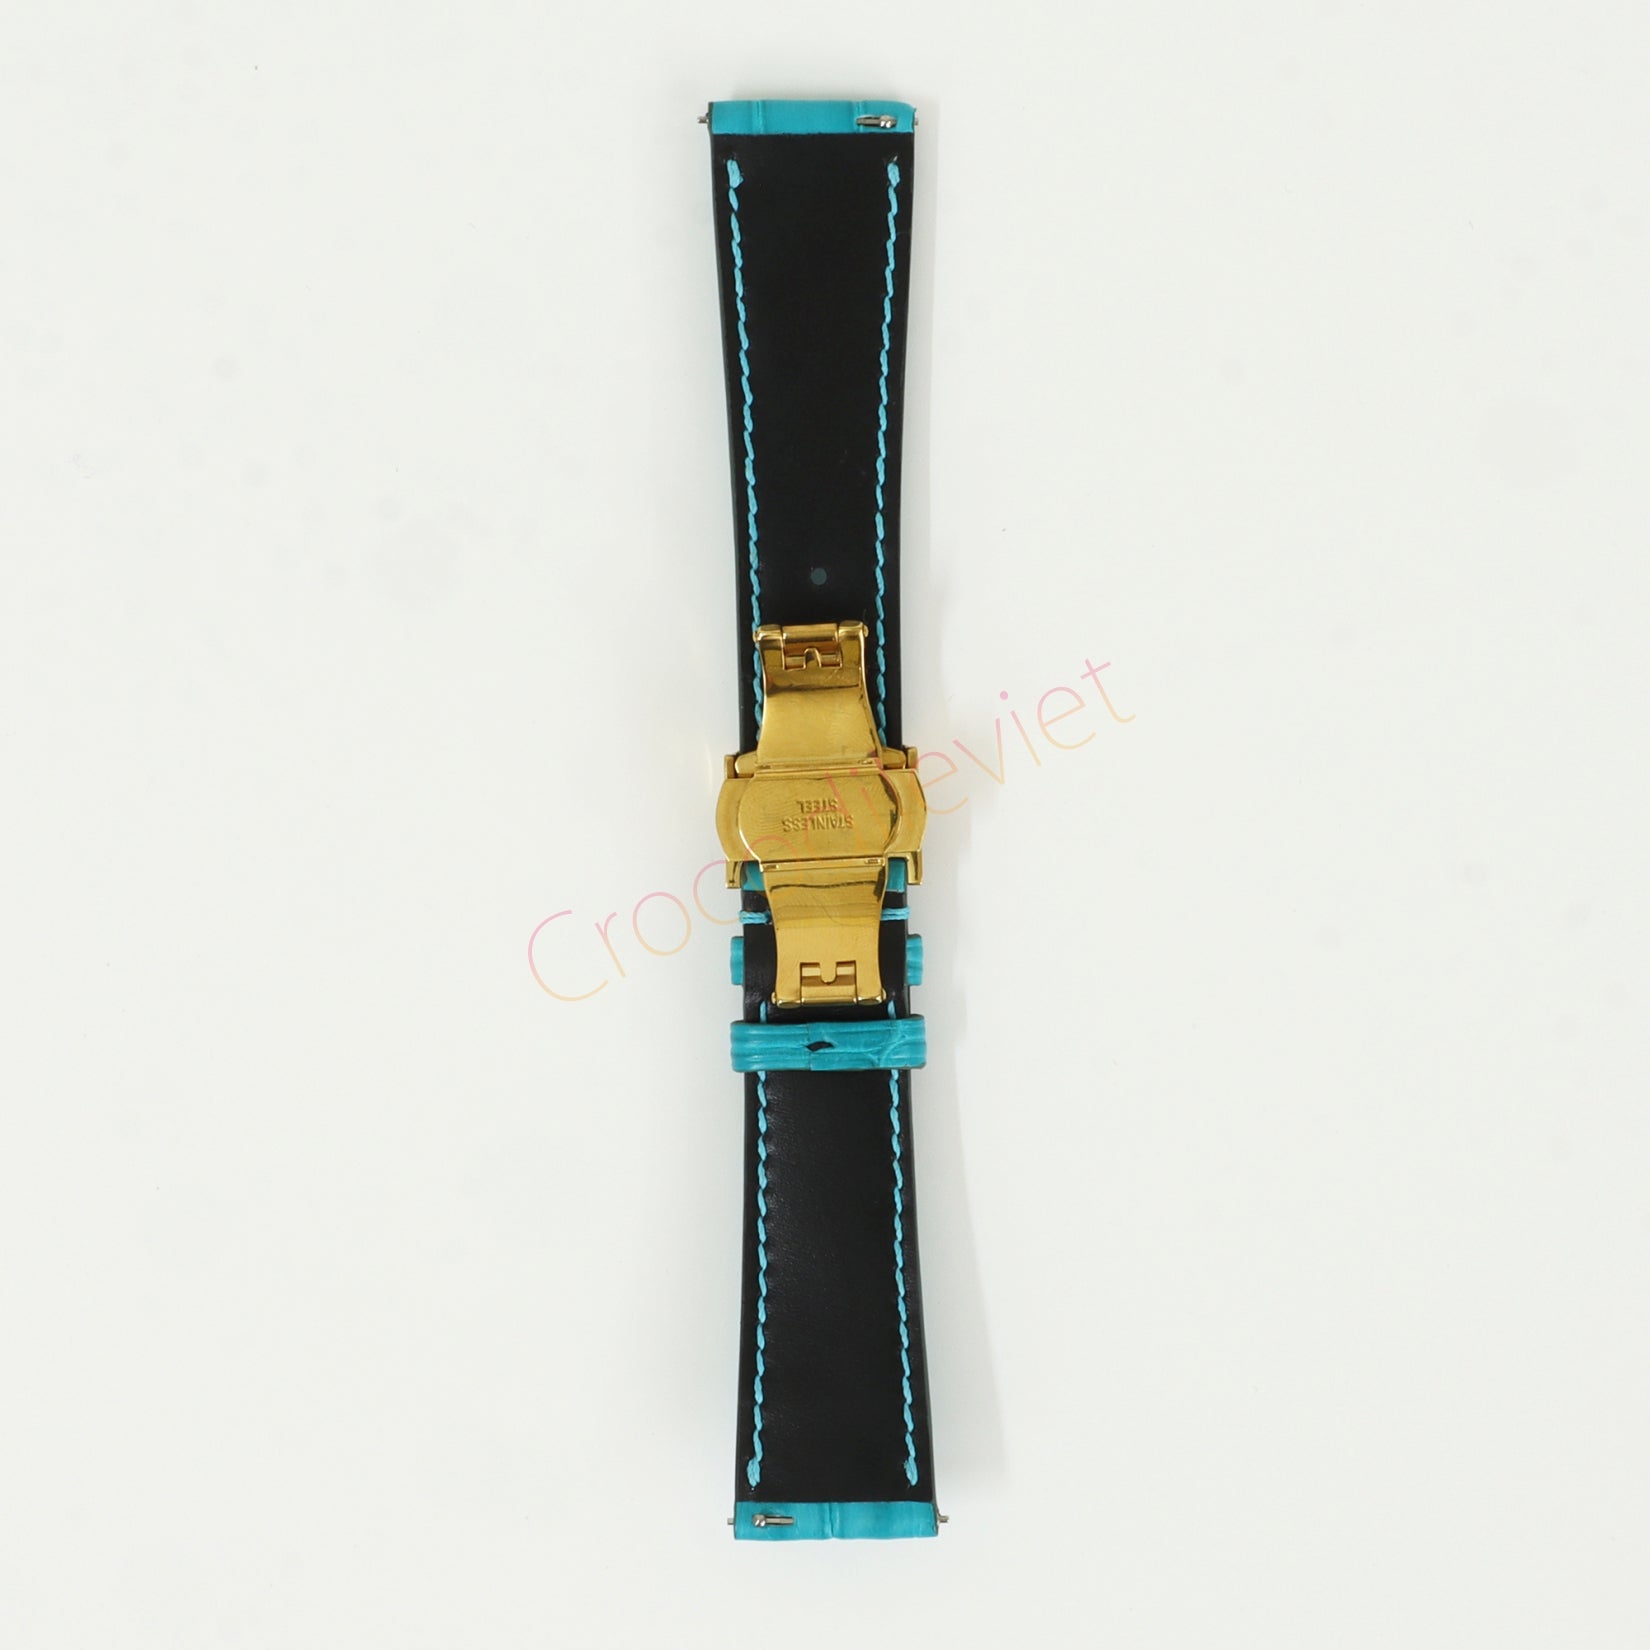 Blue Genuine Alligator Leather Watch Straps With Deployant Clasp, Leather Watch Bands Quick Release Pins, Handmade Leather Watch Strap